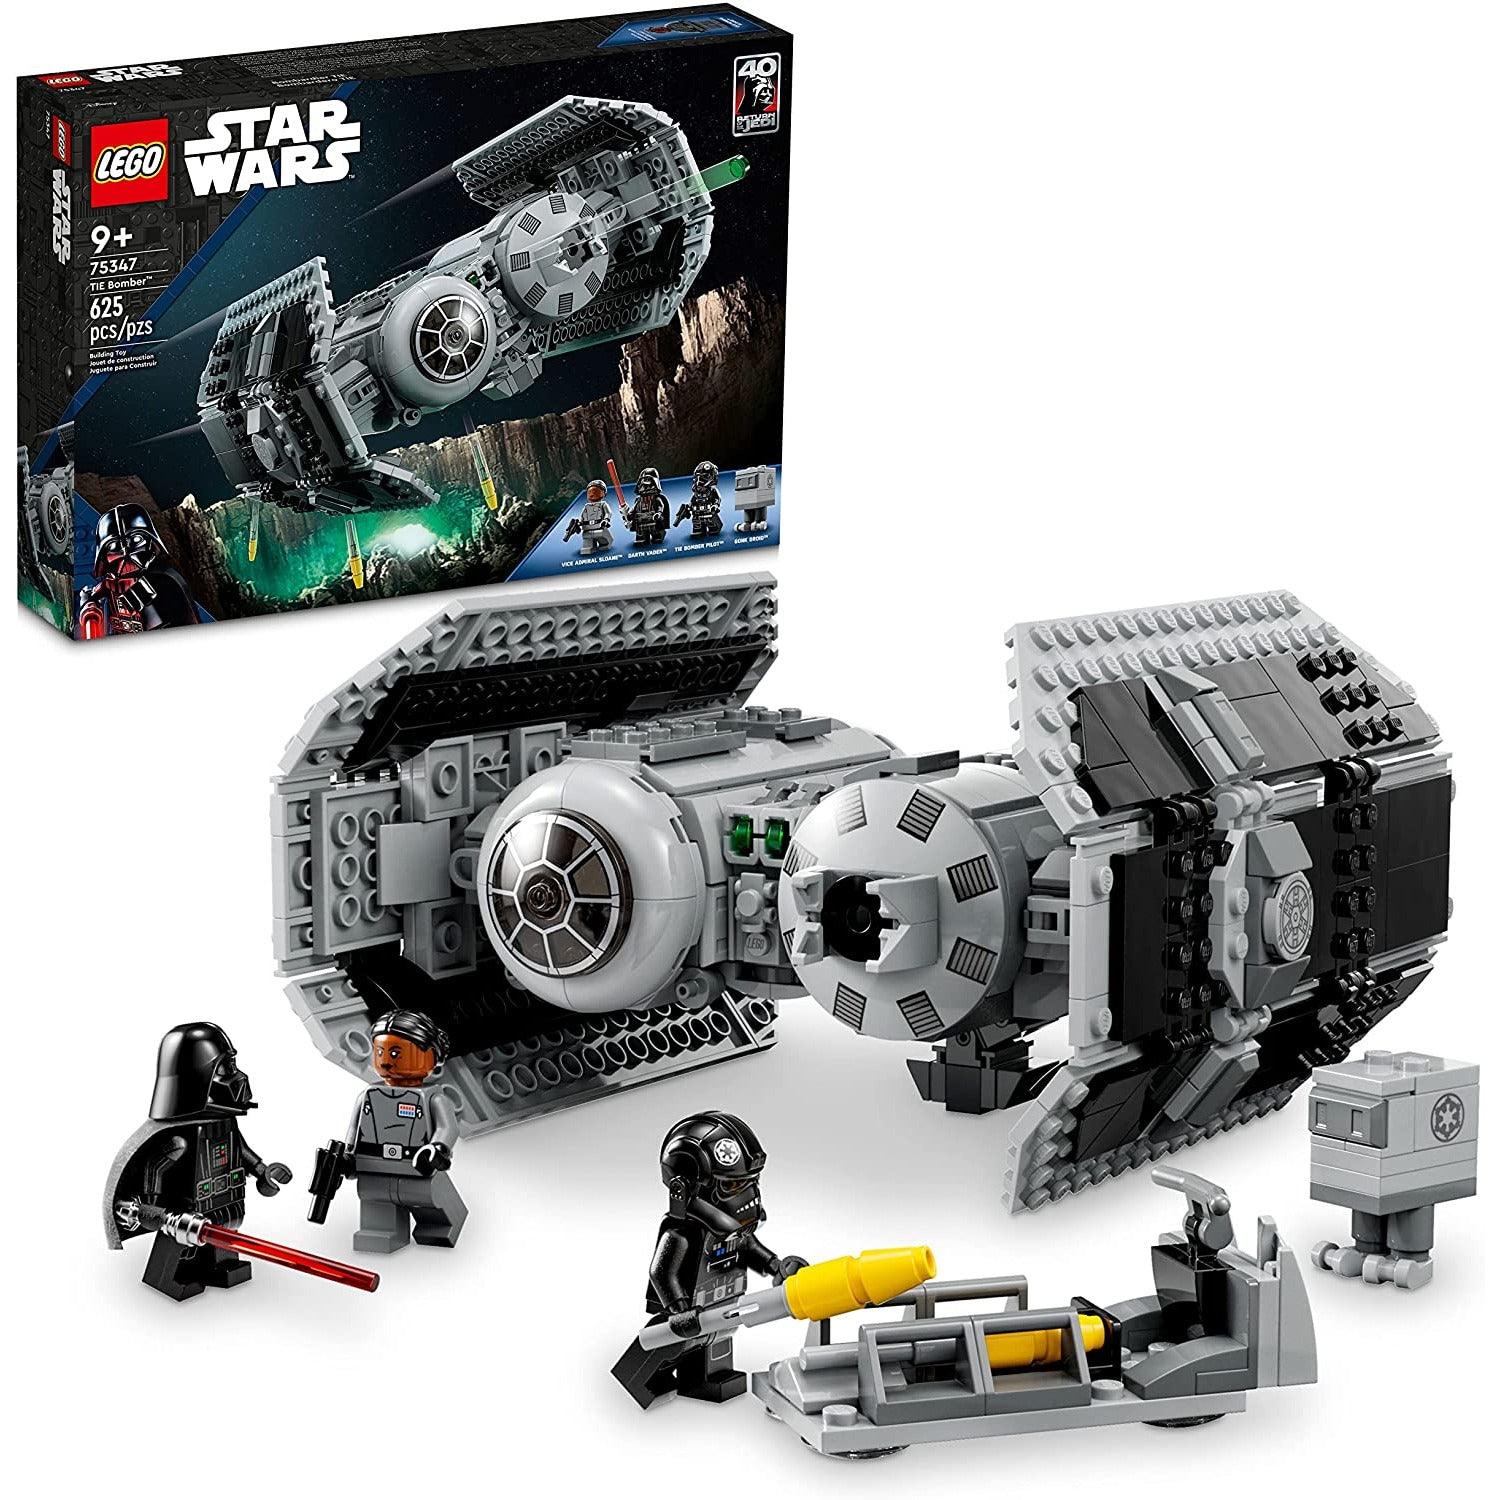 LEGO 75347 Star Wars TIE Bomber, Model Building Kit, Starfighter with Gonk Droid Figure & Darth Vader Minifigure with a Lightsaber - BumbleToys - 5-7 Years, 8+ Years, Boys, LEGO, OXE, Pre-Order, star wars